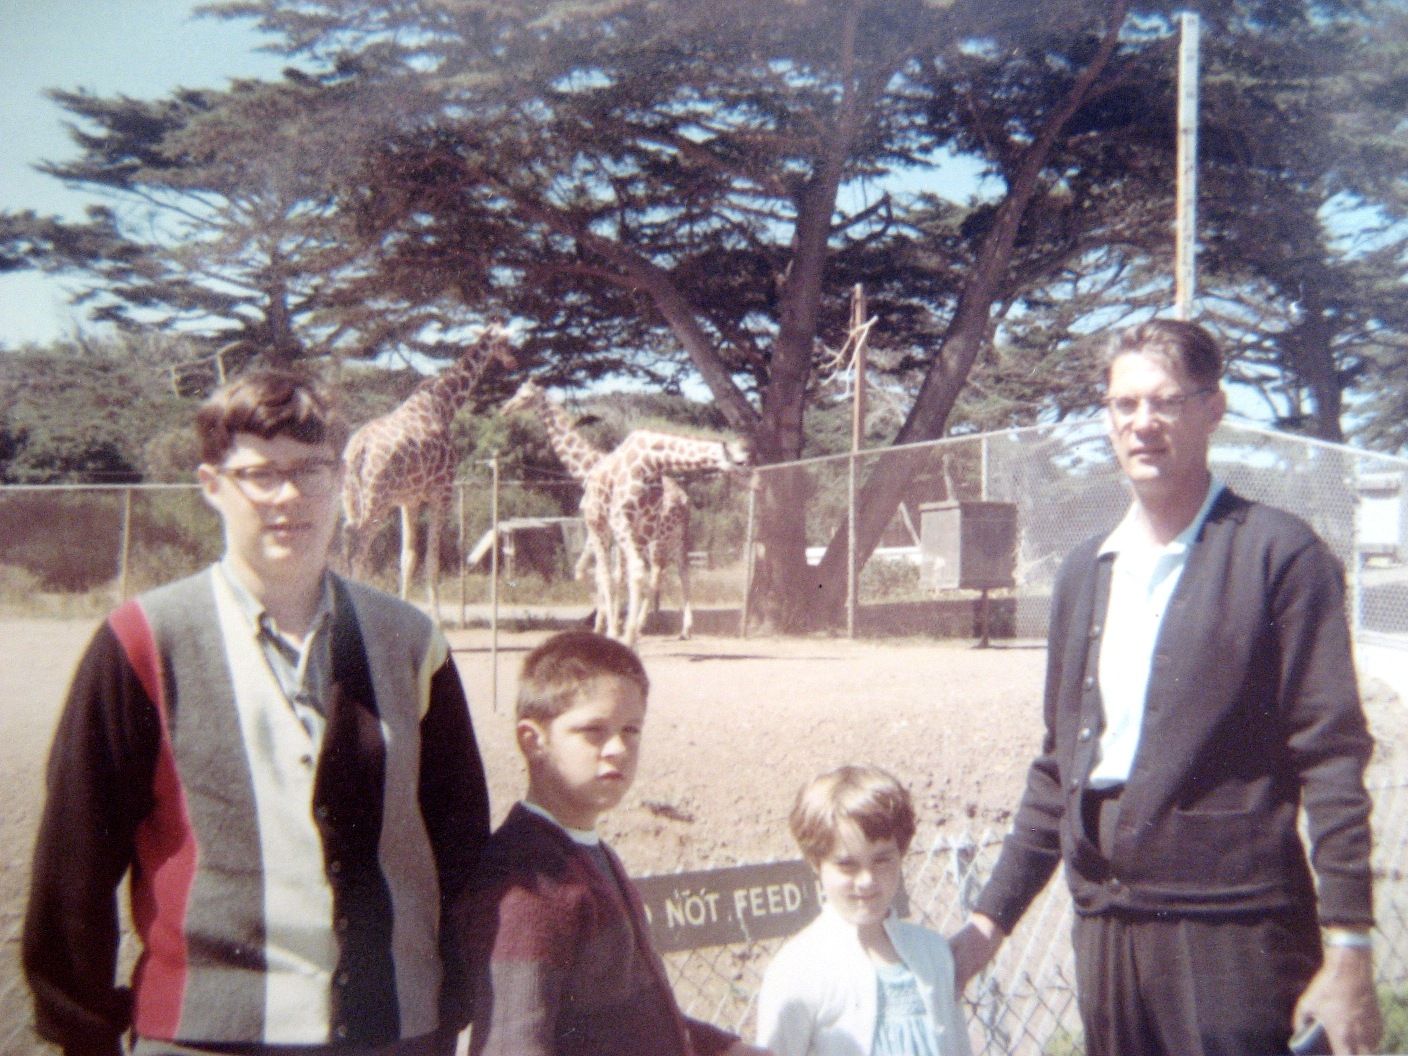 My father and my brothers at the Fleishhacker Zoo in San Francisco, about 1966.